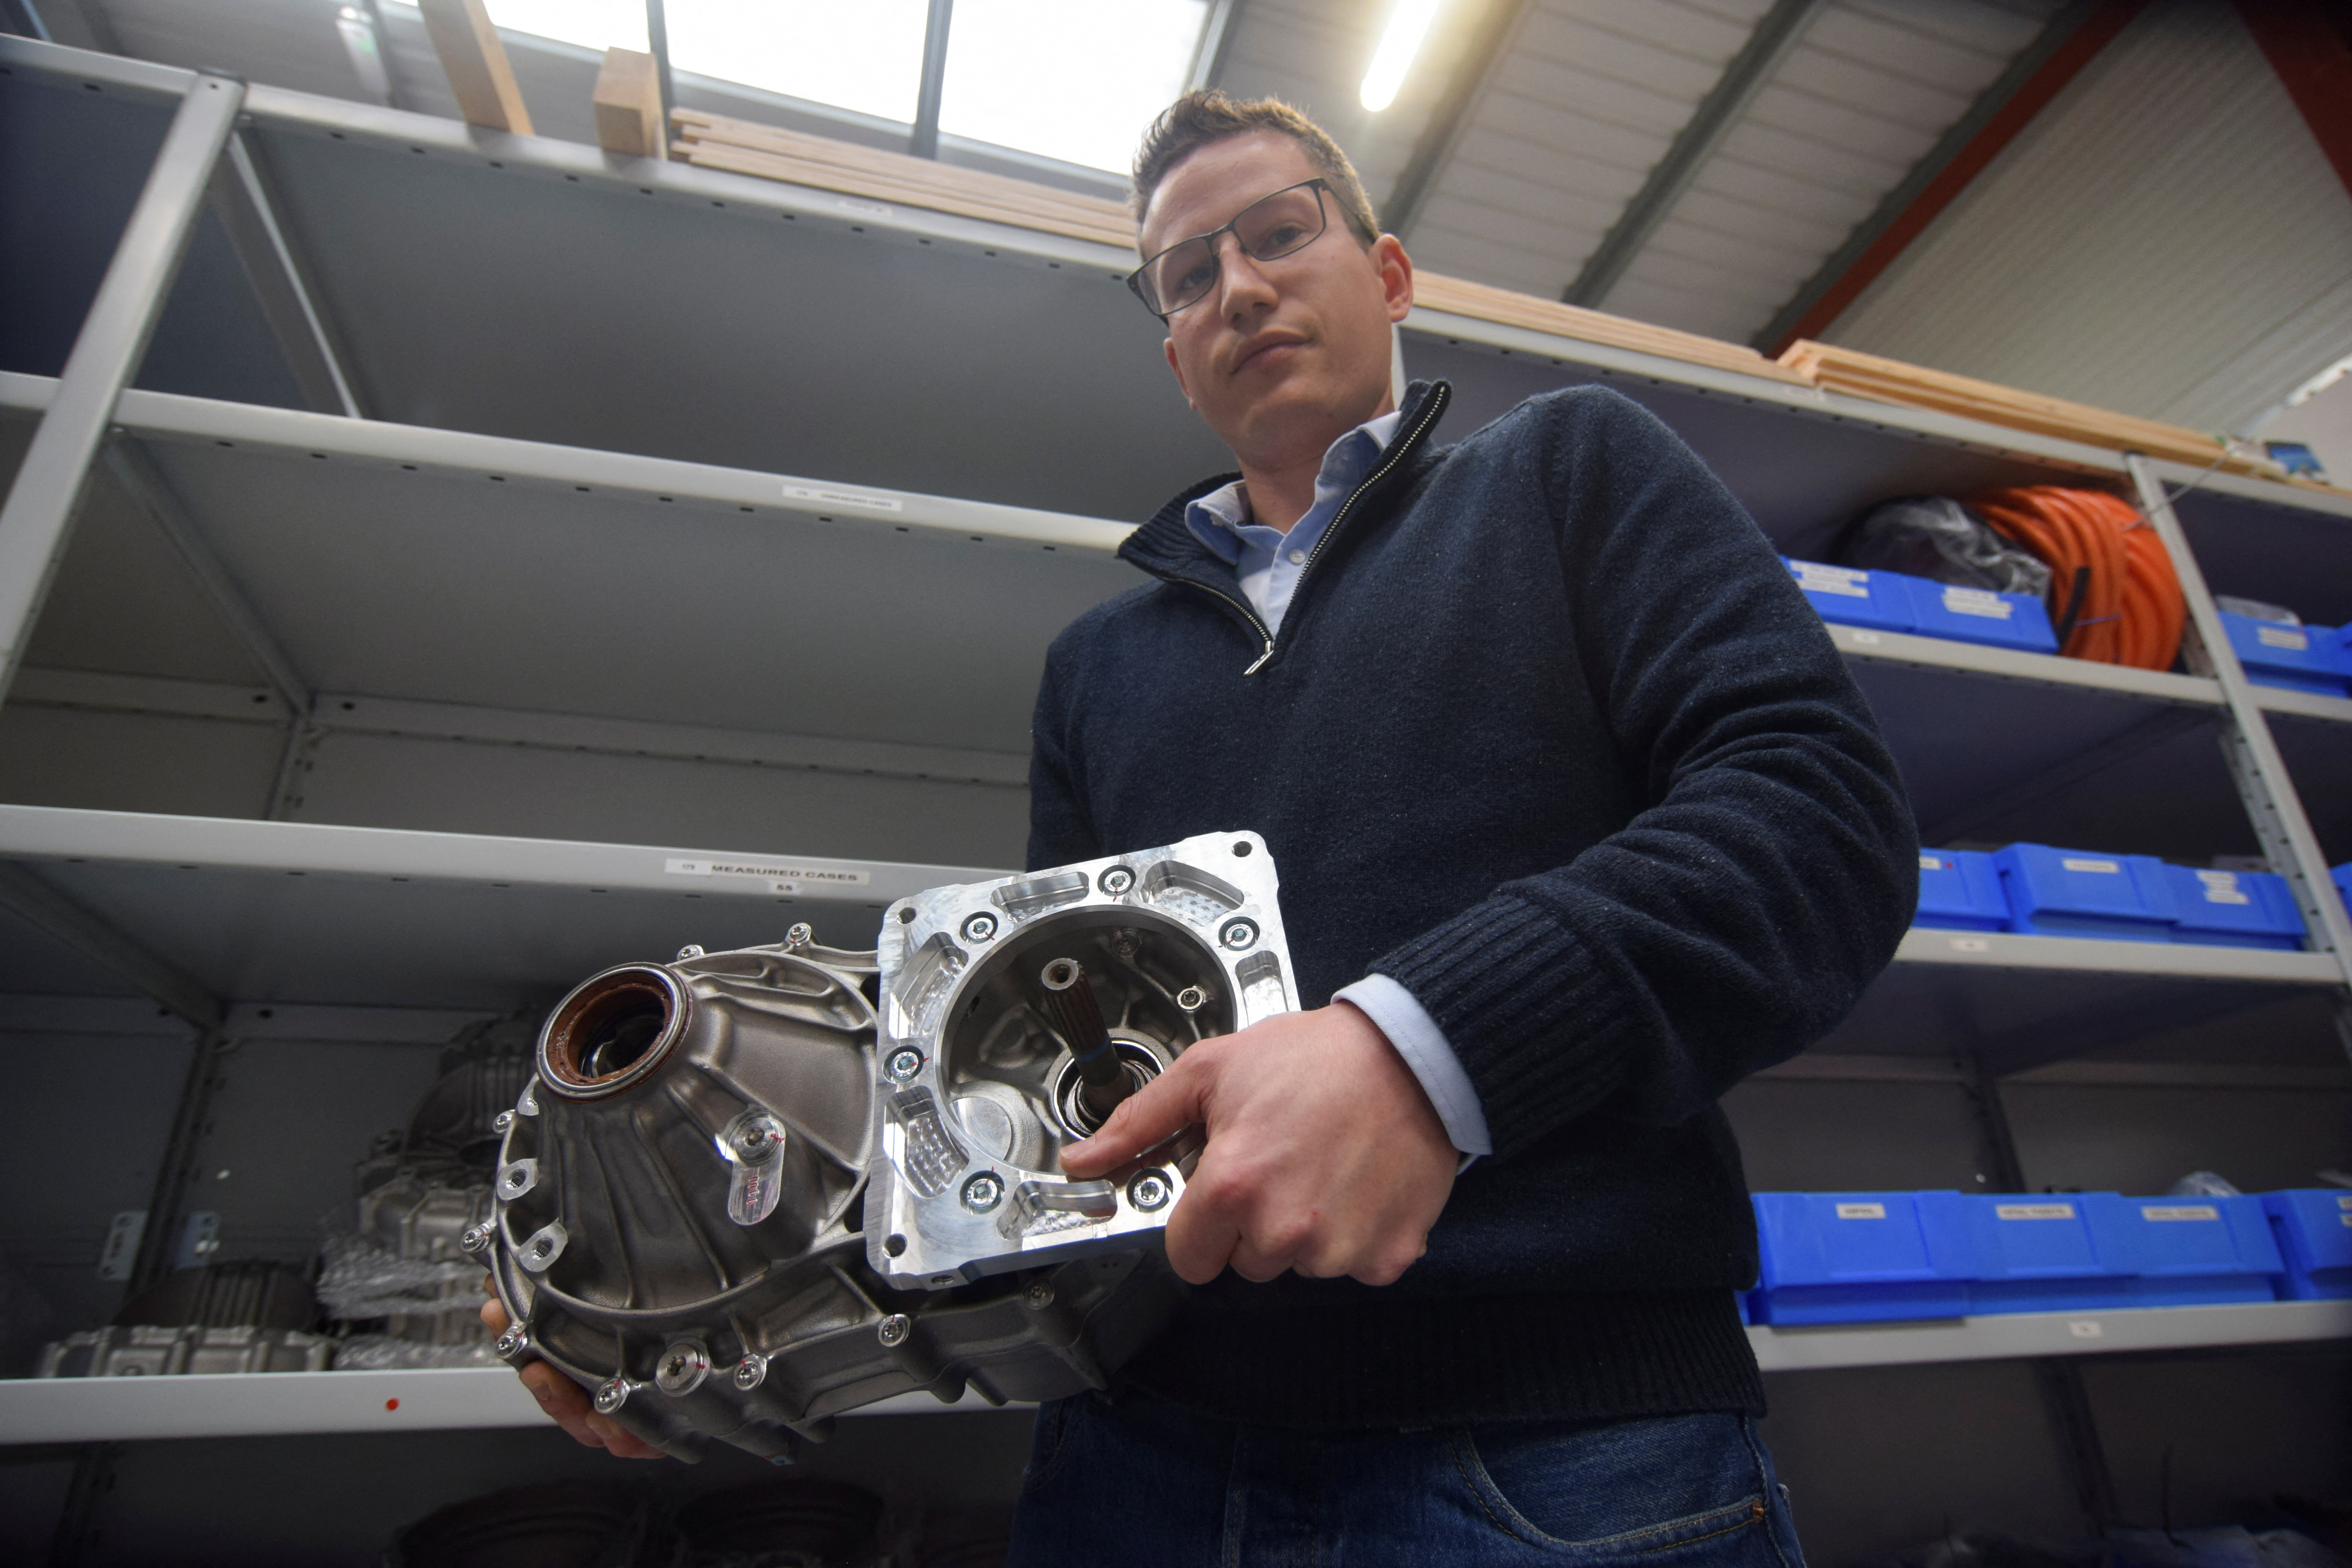 John Bond, commercial manager of motorsport engine maker Swindon Powertrain, holds a part of an e-axle the company has developed, in Swindon